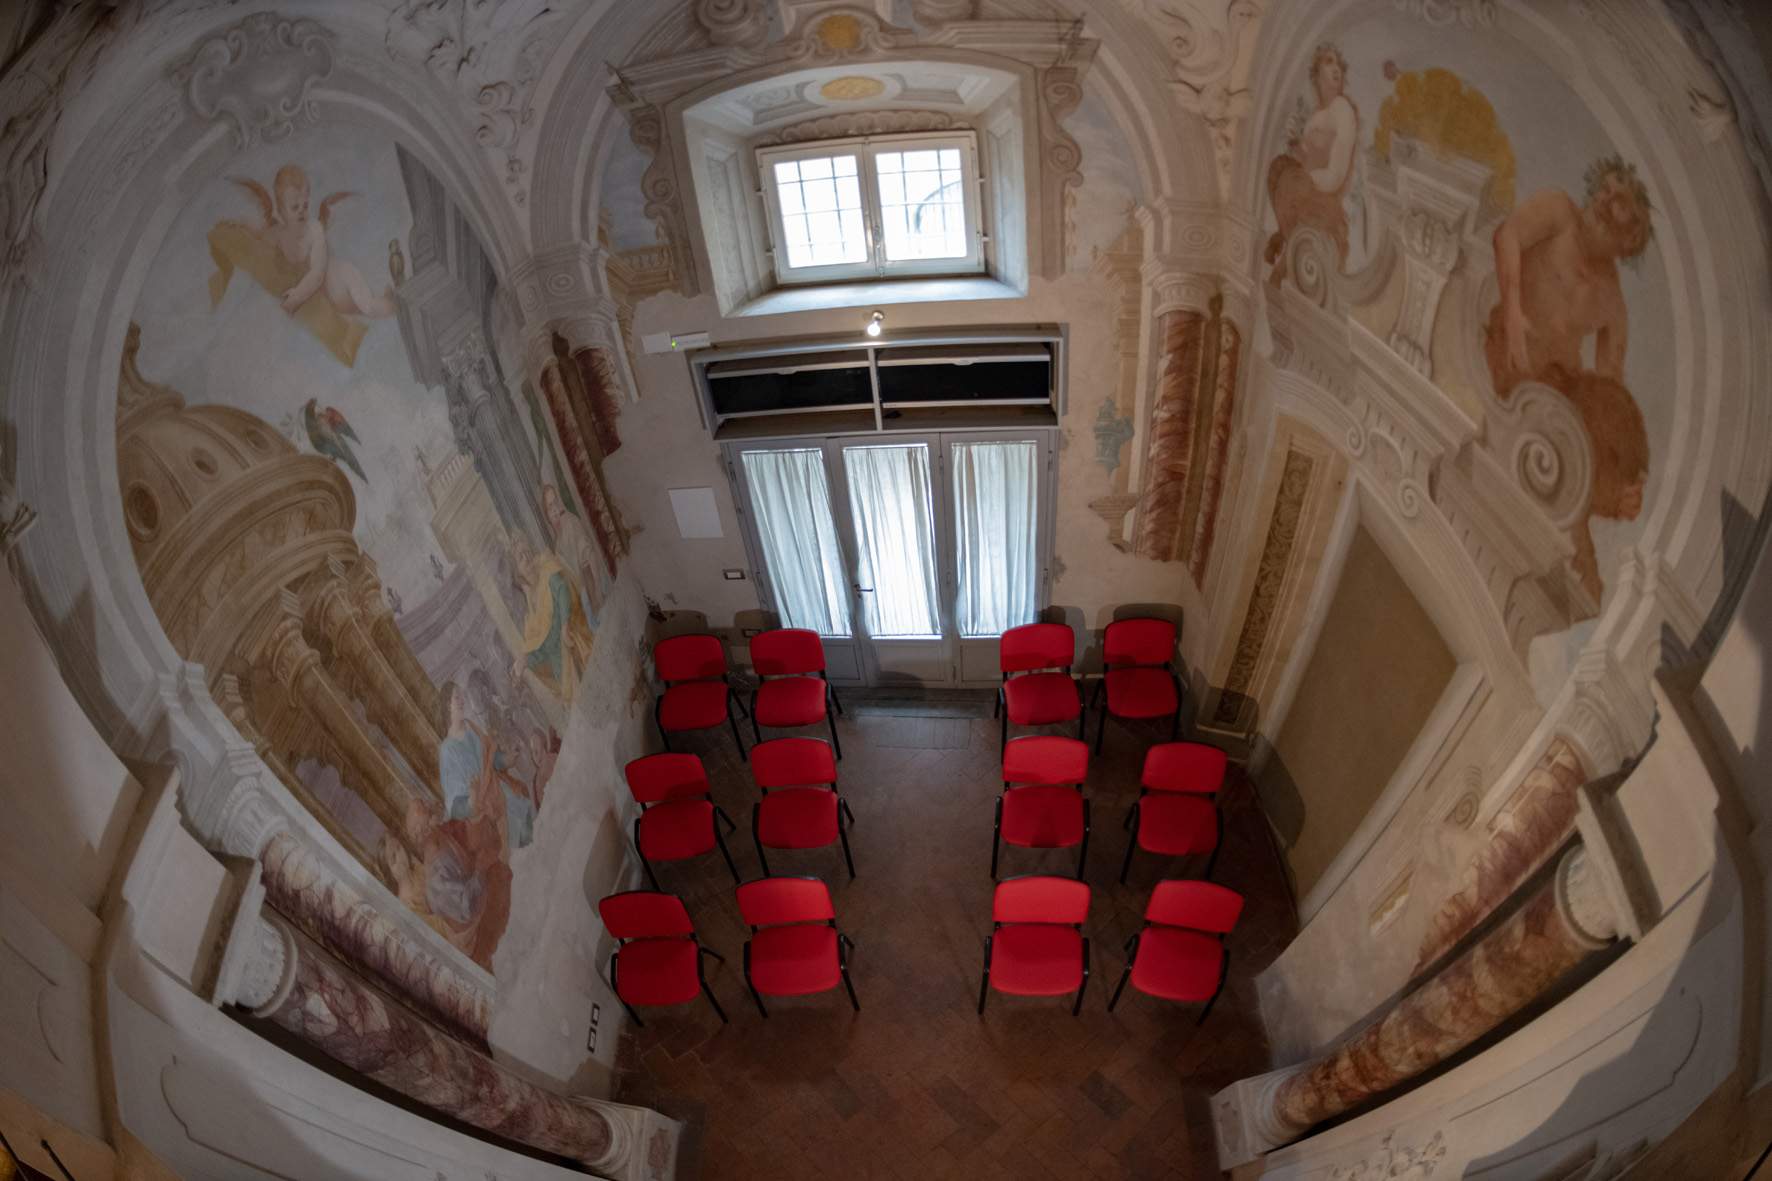 Pistoia rediscovers one of its jewels: the Gatteschi Theater, one of the world's smallest, reopens